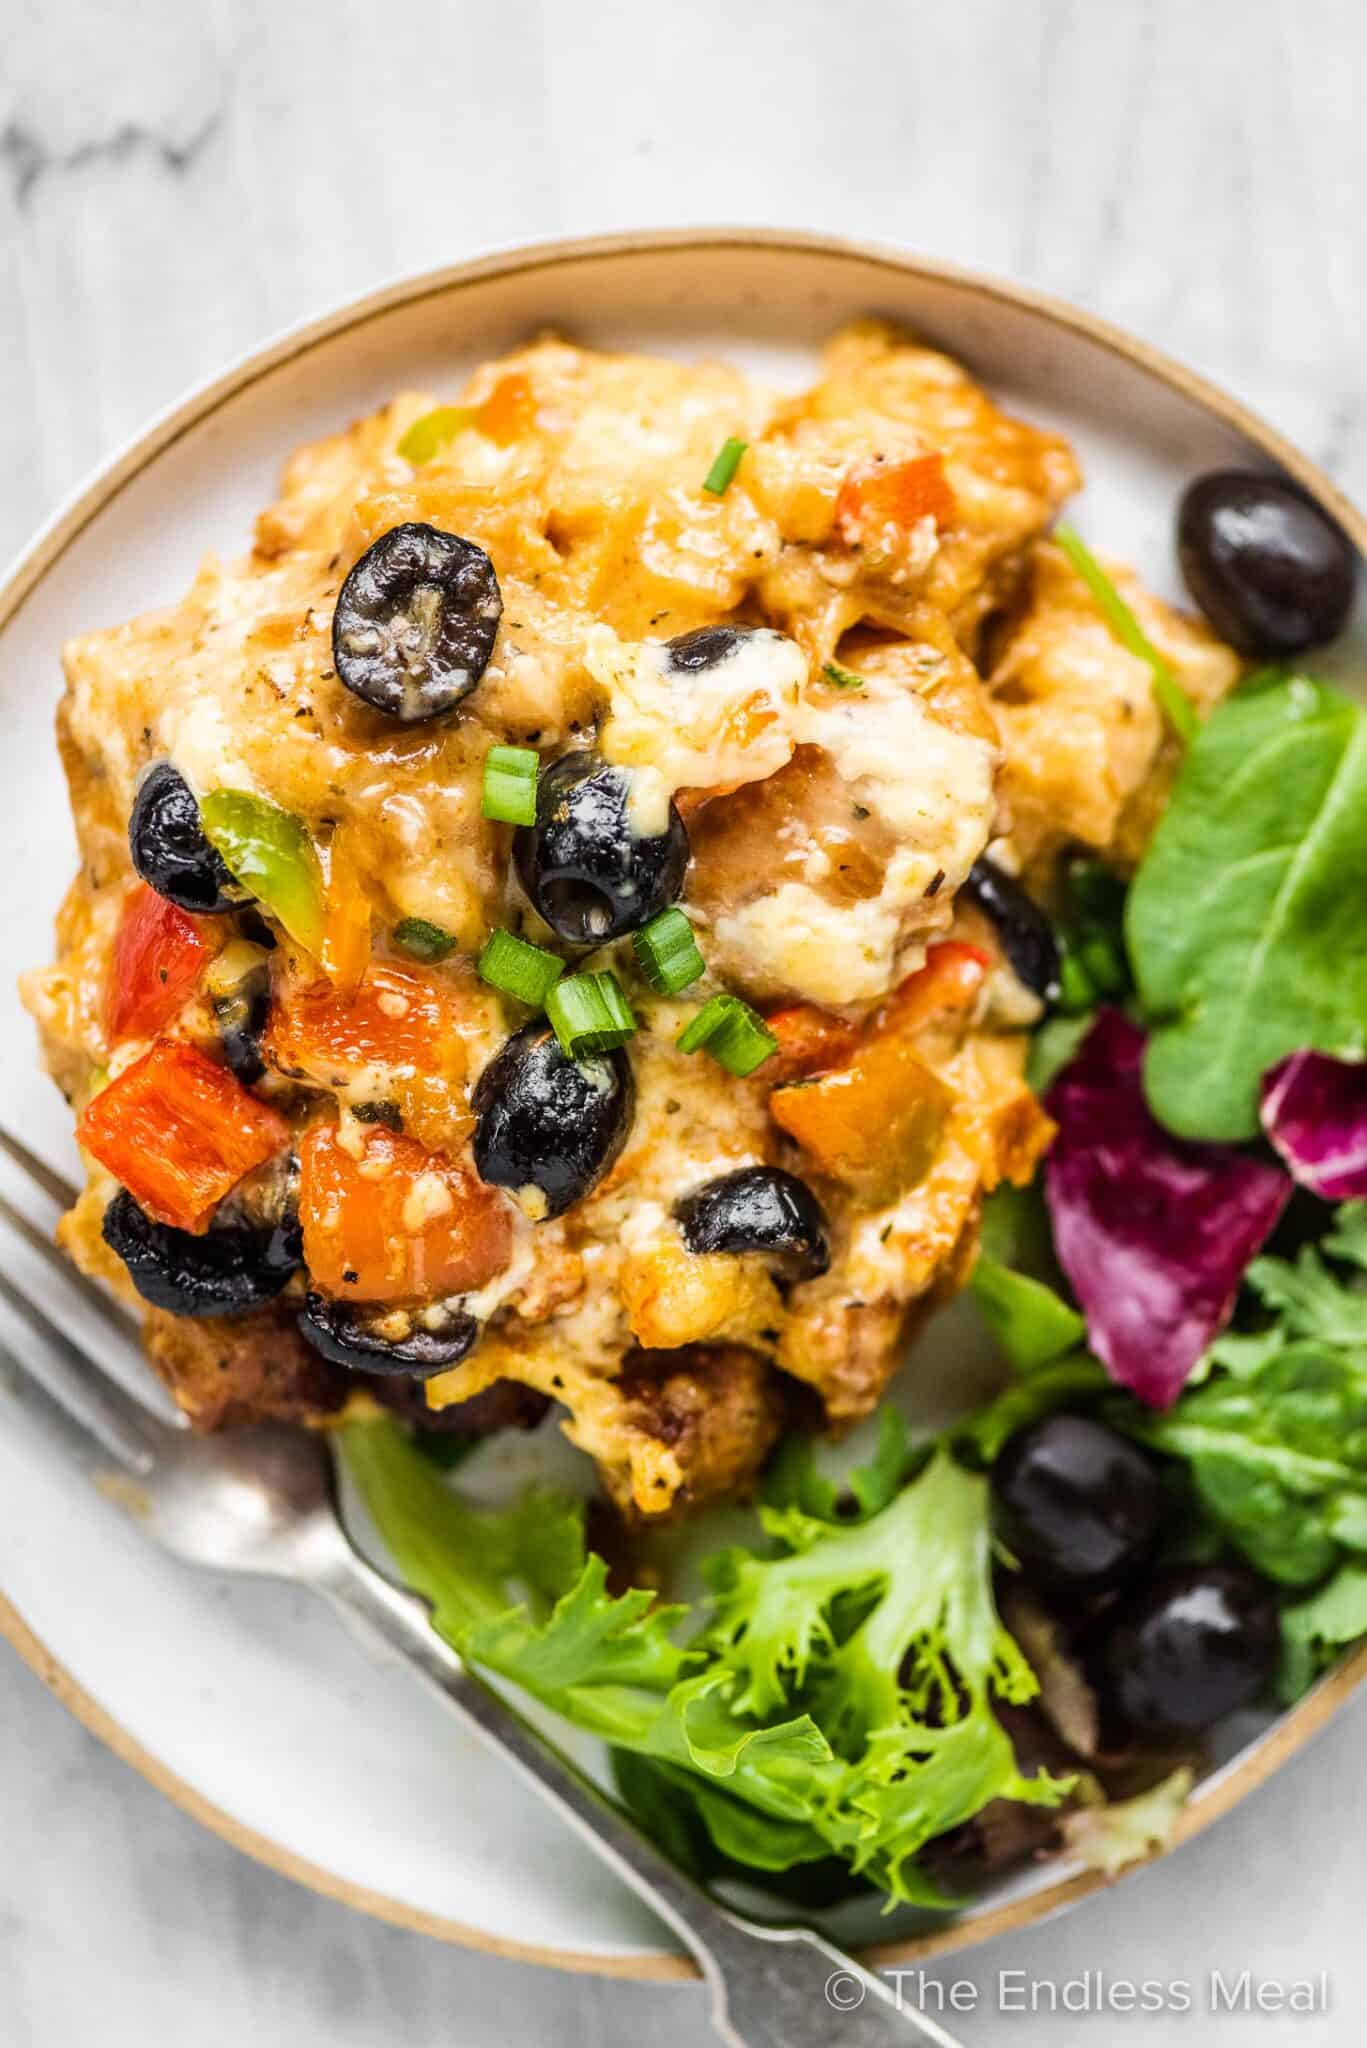 Breakfast strata on a plate with a salad.